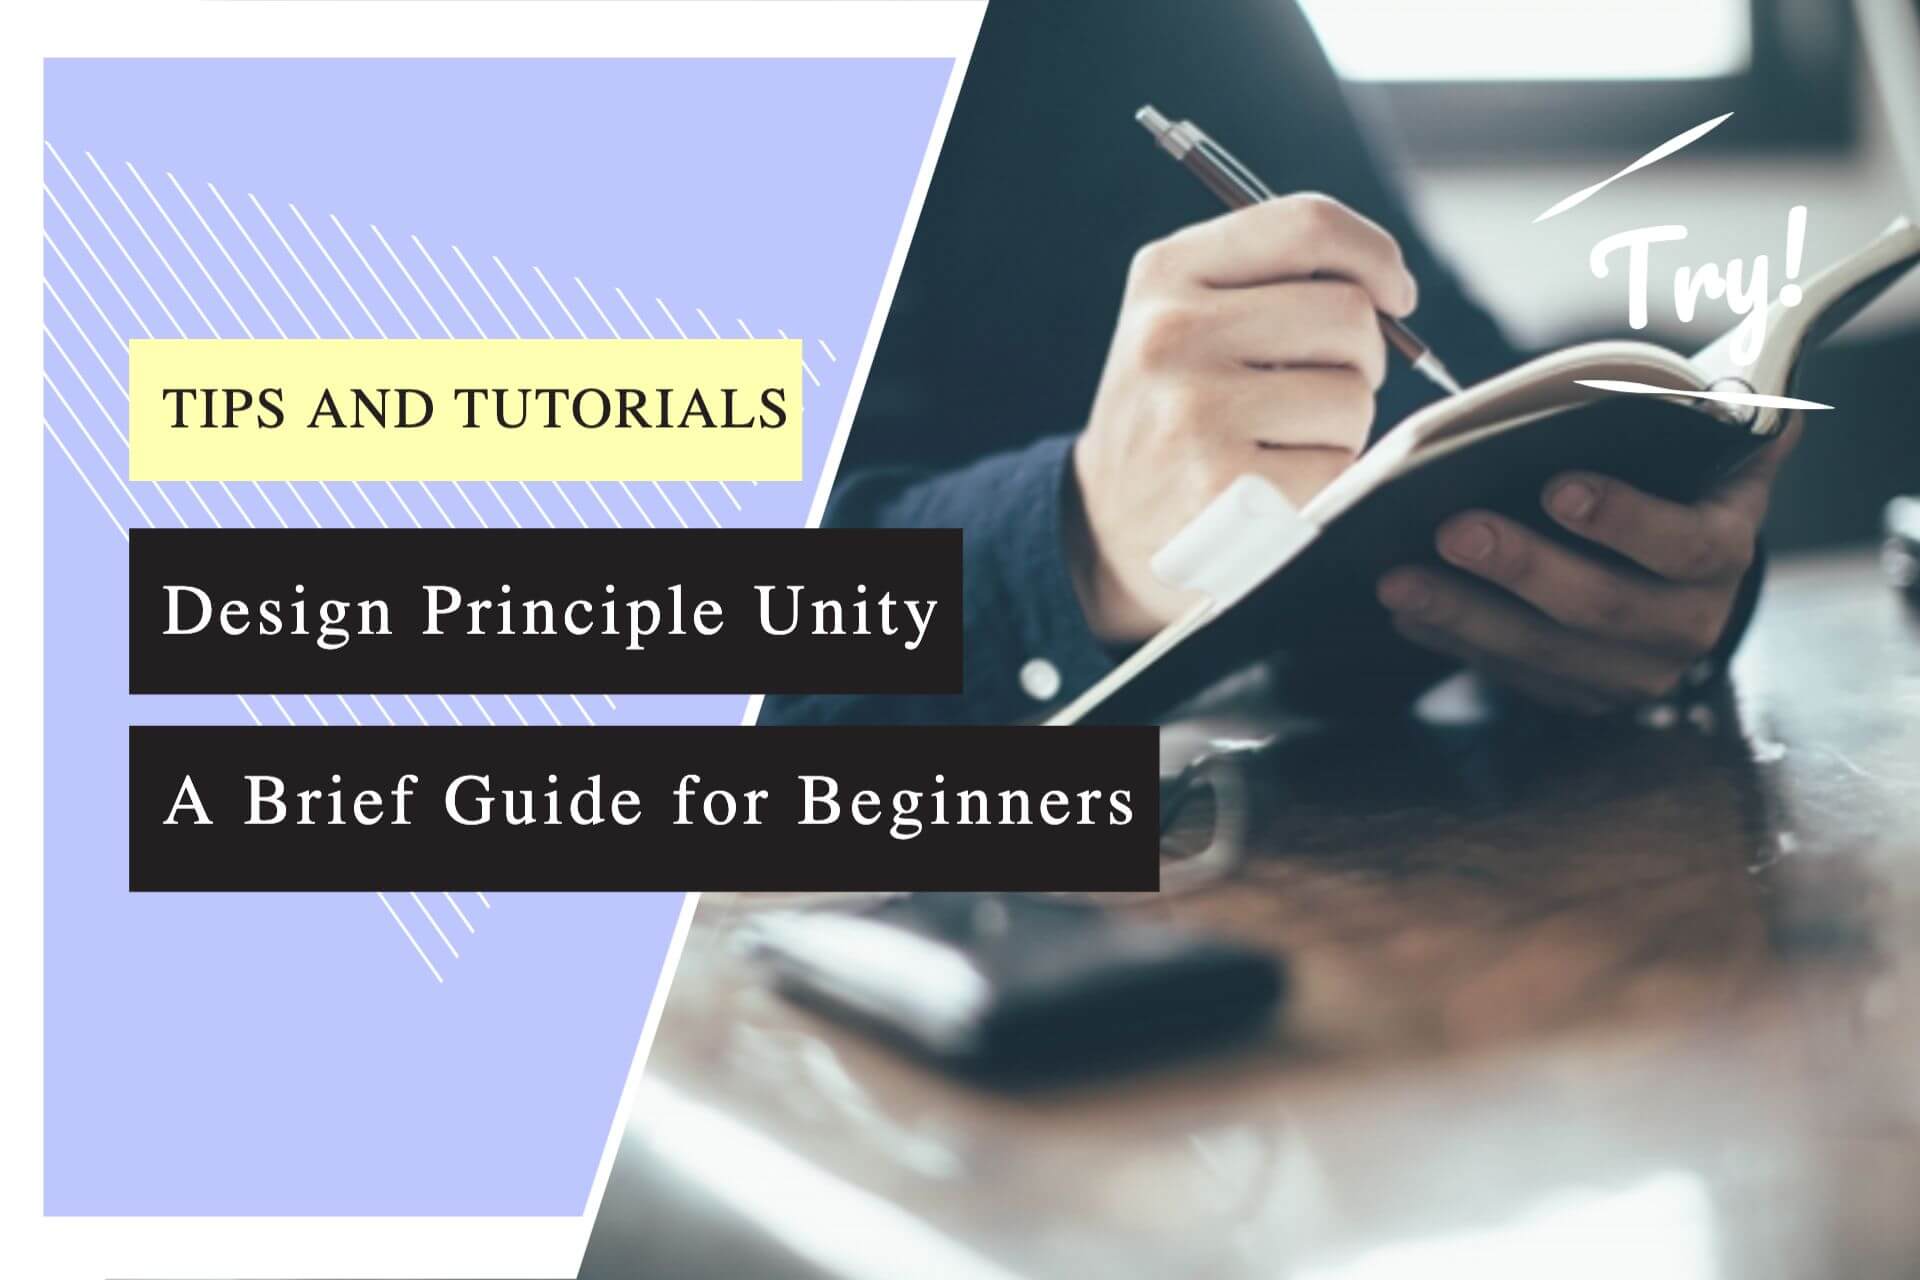 Design Principle Unity: A Brief Guide for Beginners with 5 Useful Tips